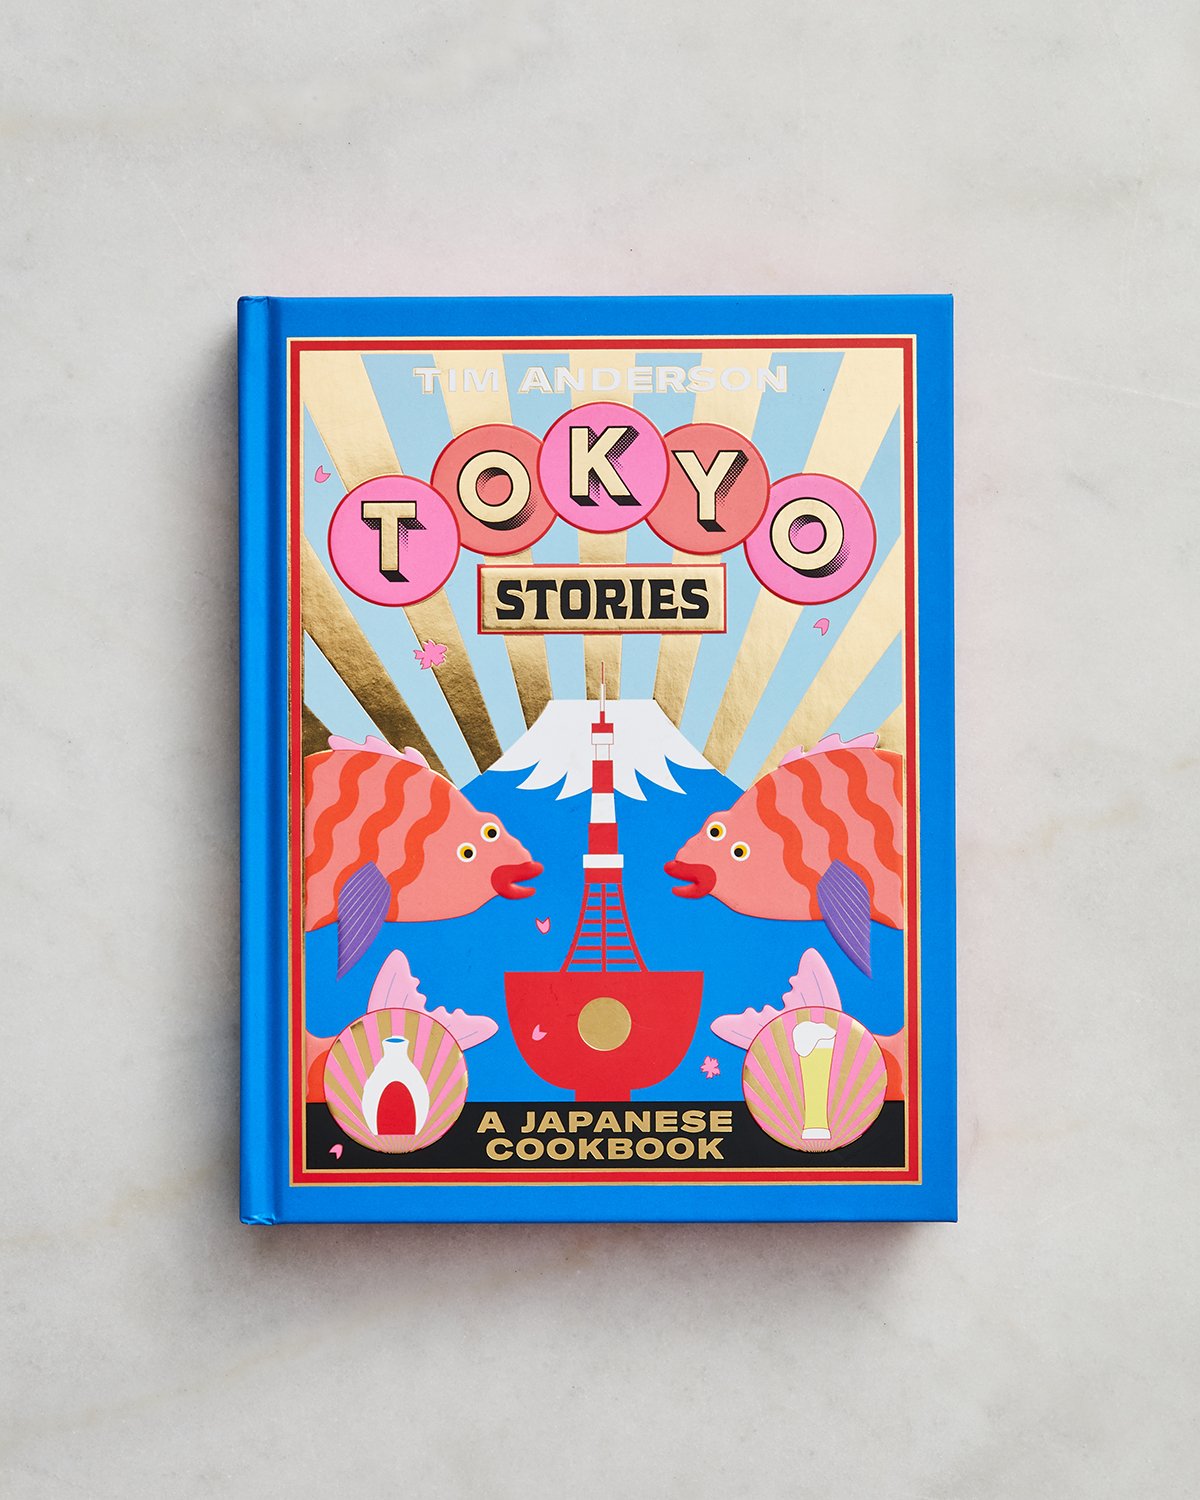 Tokyo Stories by Tim Anderson